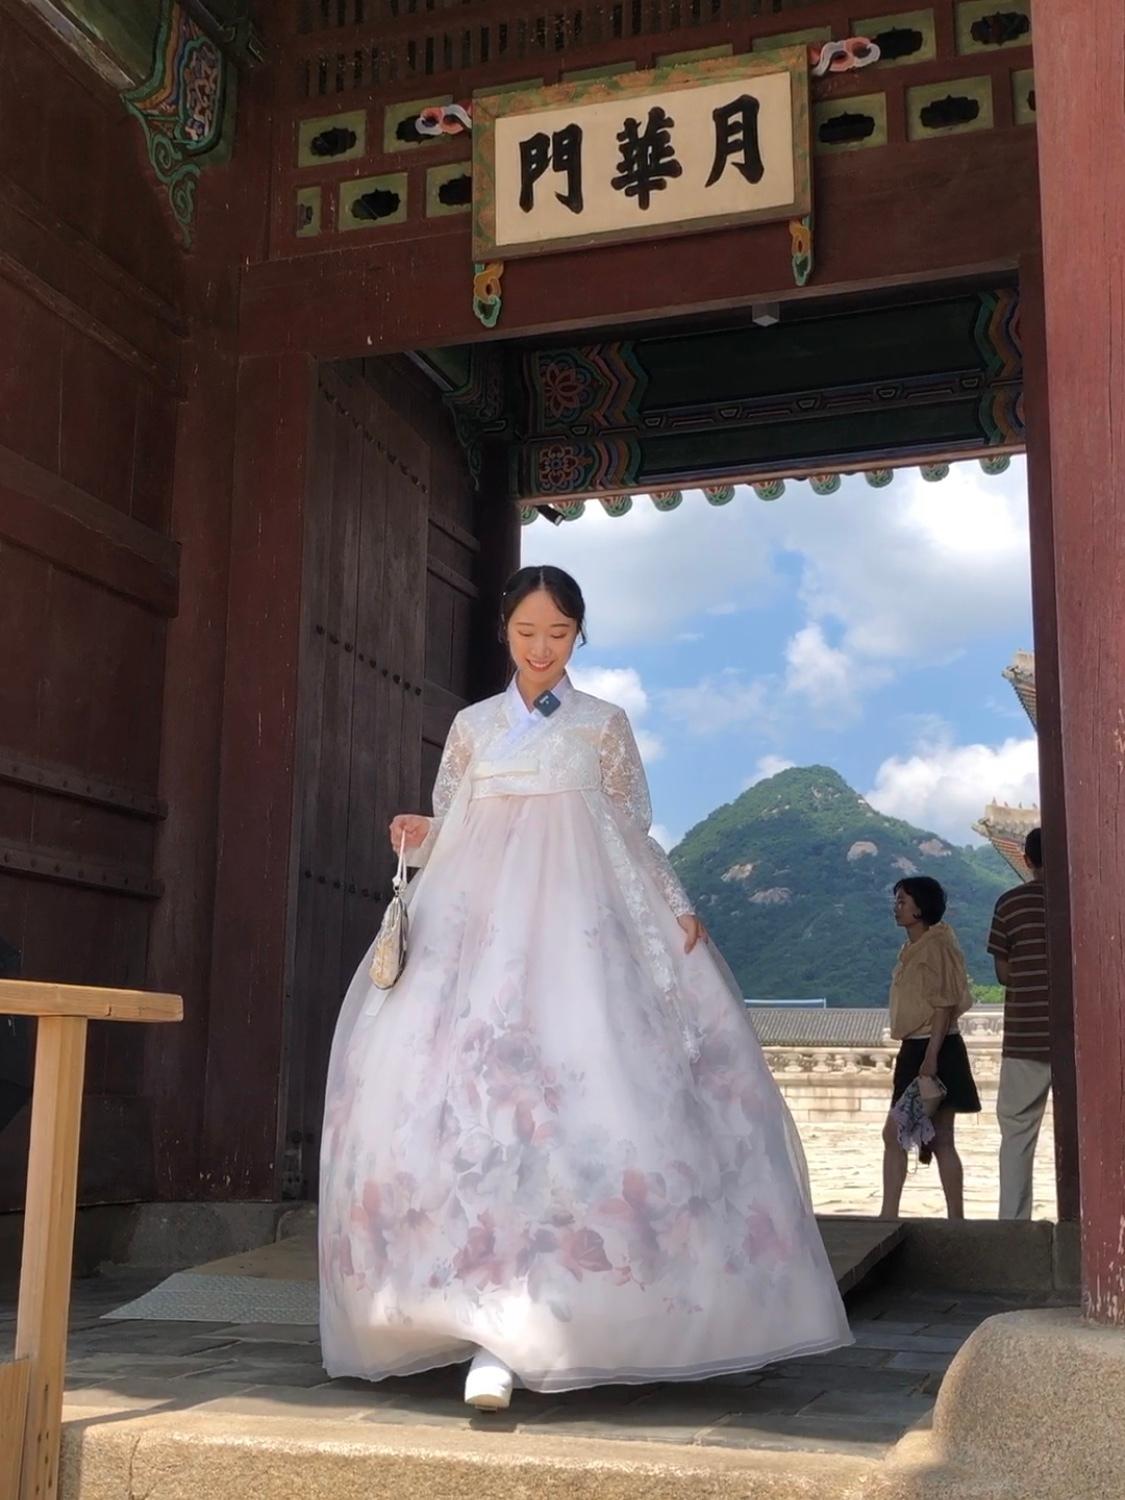 A happy woman in a traditional Korean outfit stands in front of Gyeongbokgung Palace with a fox statue, temple, sky and clouds in the background.